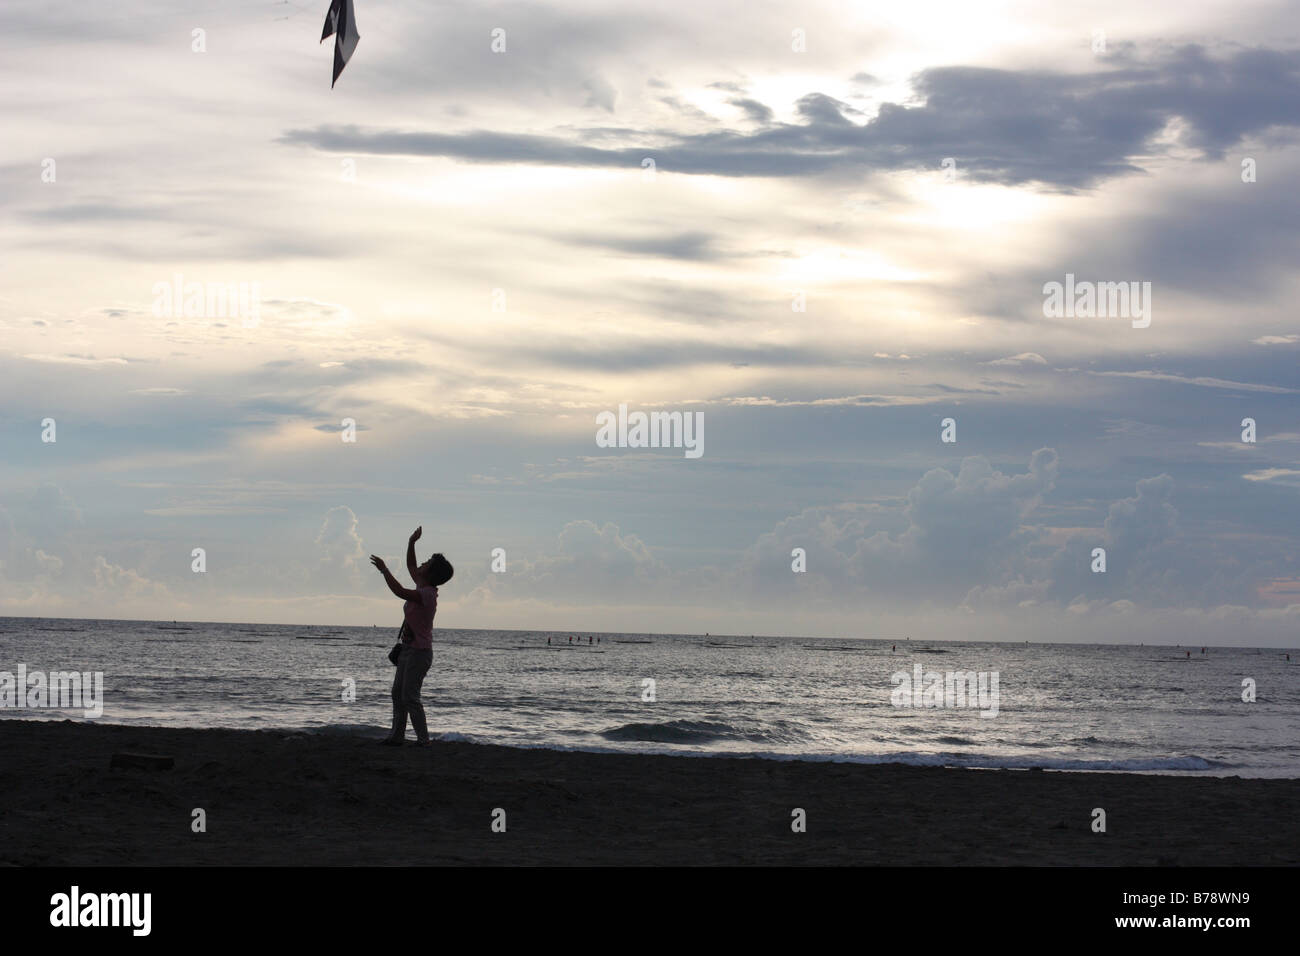 Woman letting go of a kite. Stock Photo